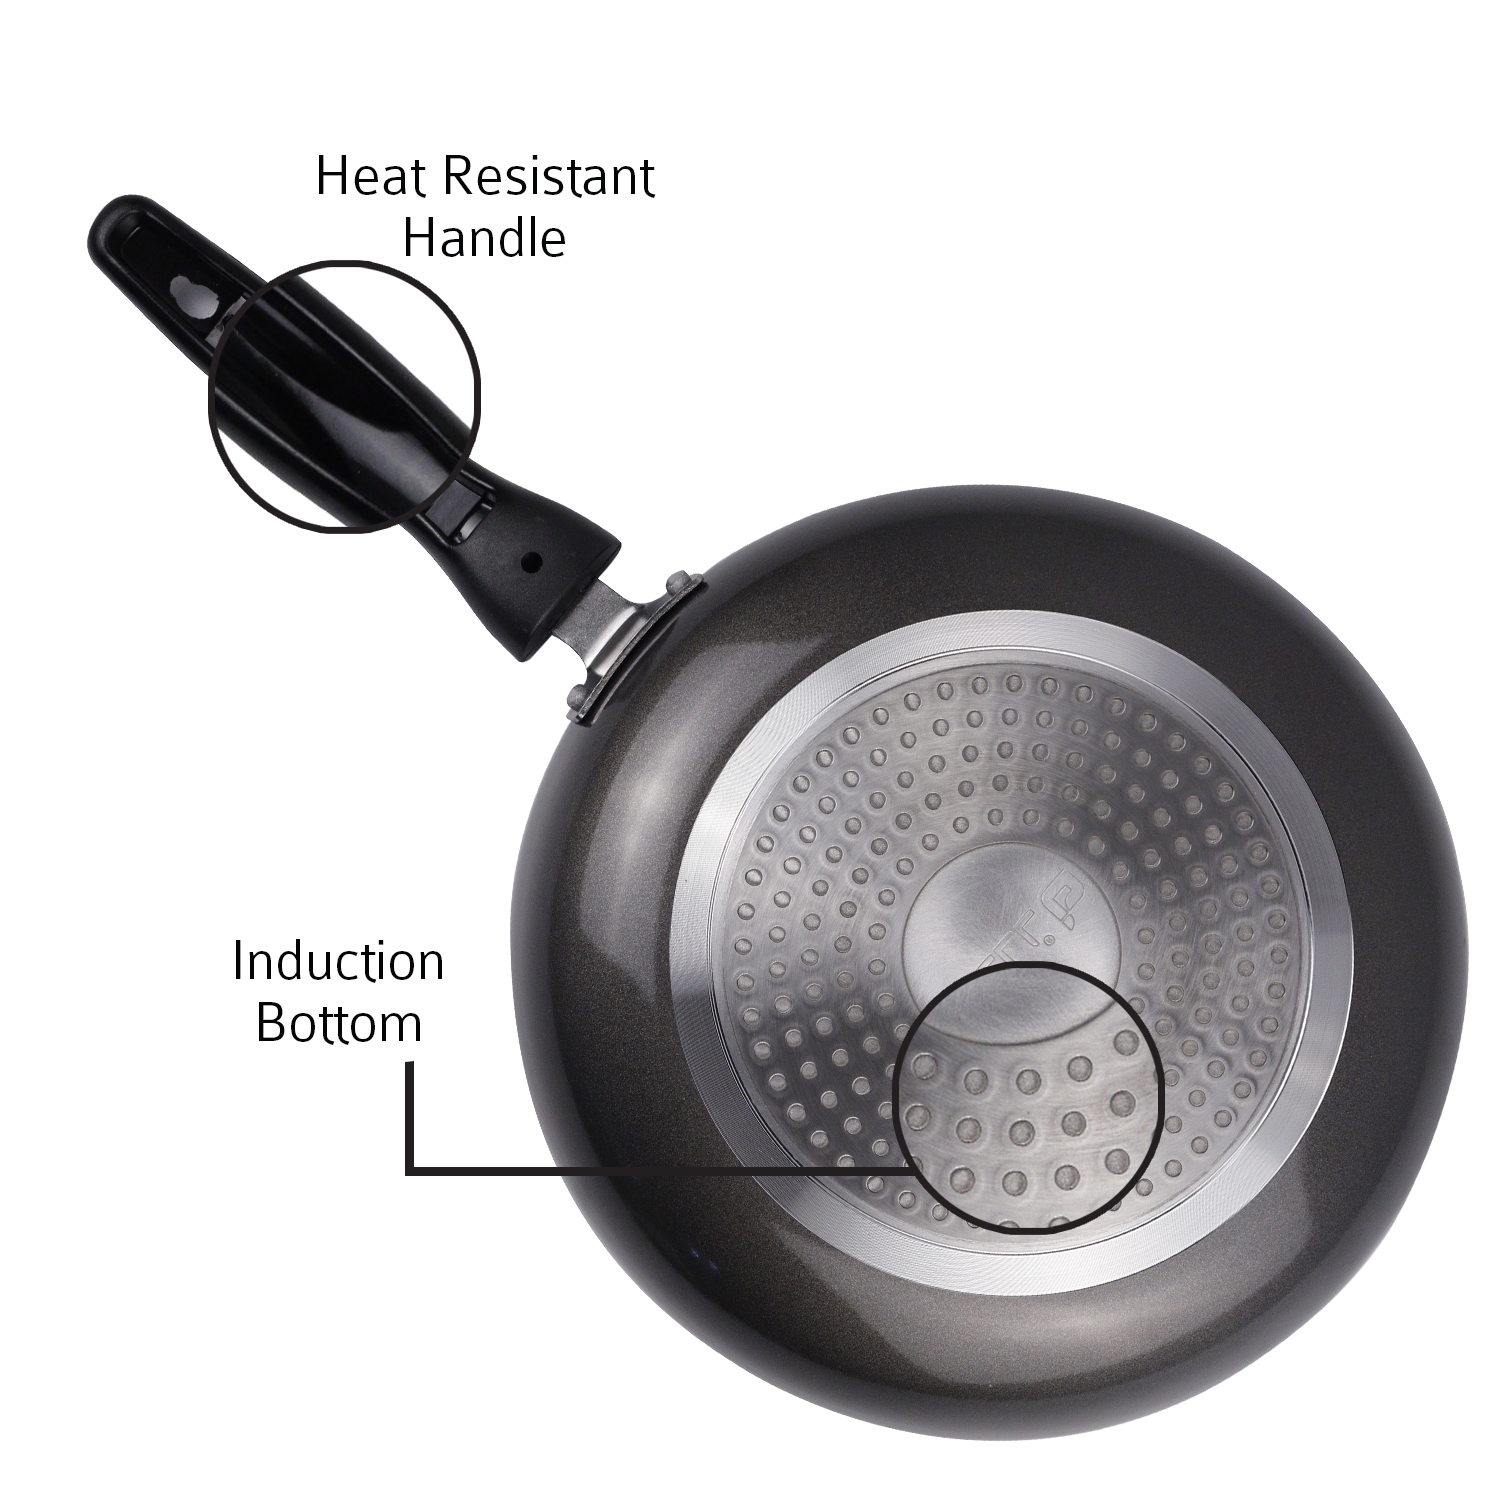 Ibell fp24g 24cm 3 layer non stick fry pan induction base bottom with  premium black grey color